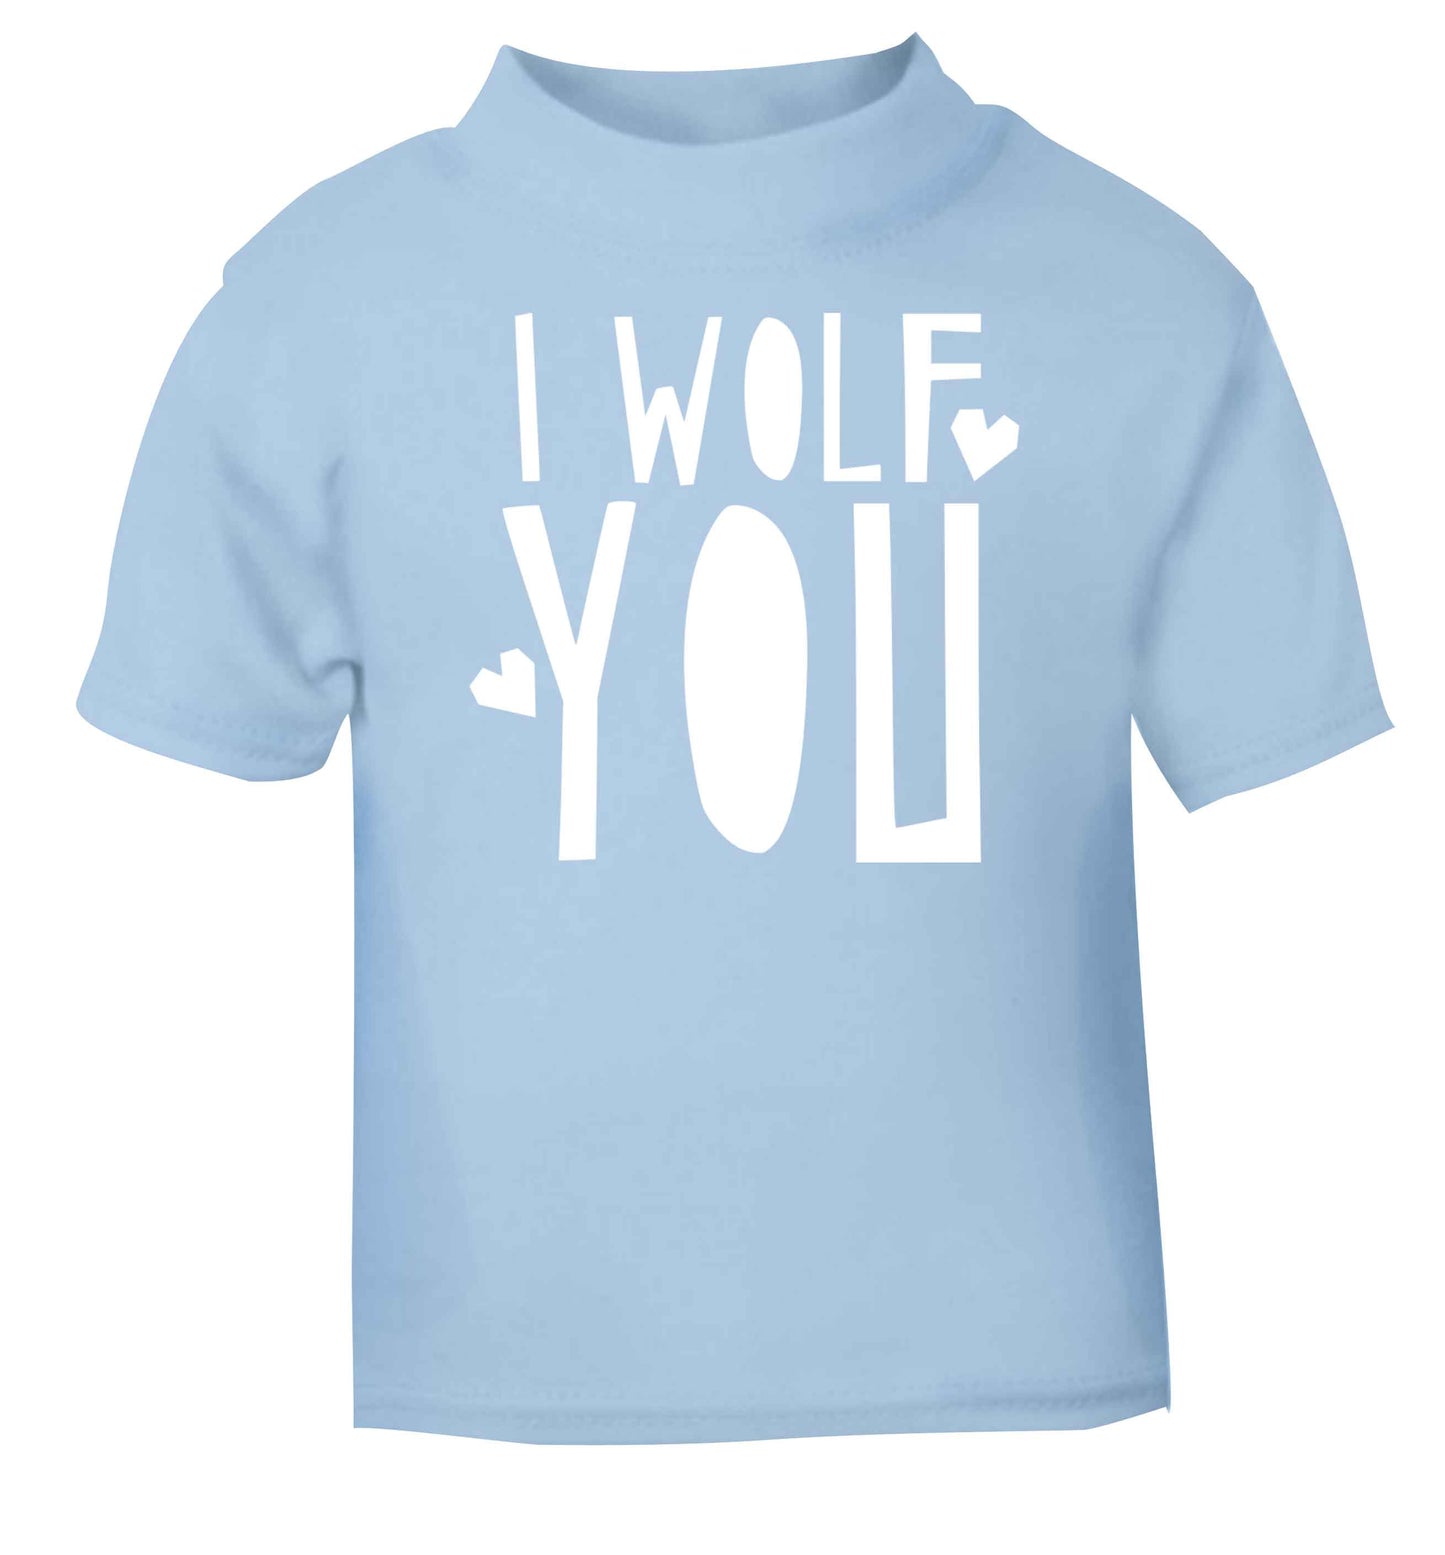 I wolf you light blue baby toddler Tshirt 2 Years